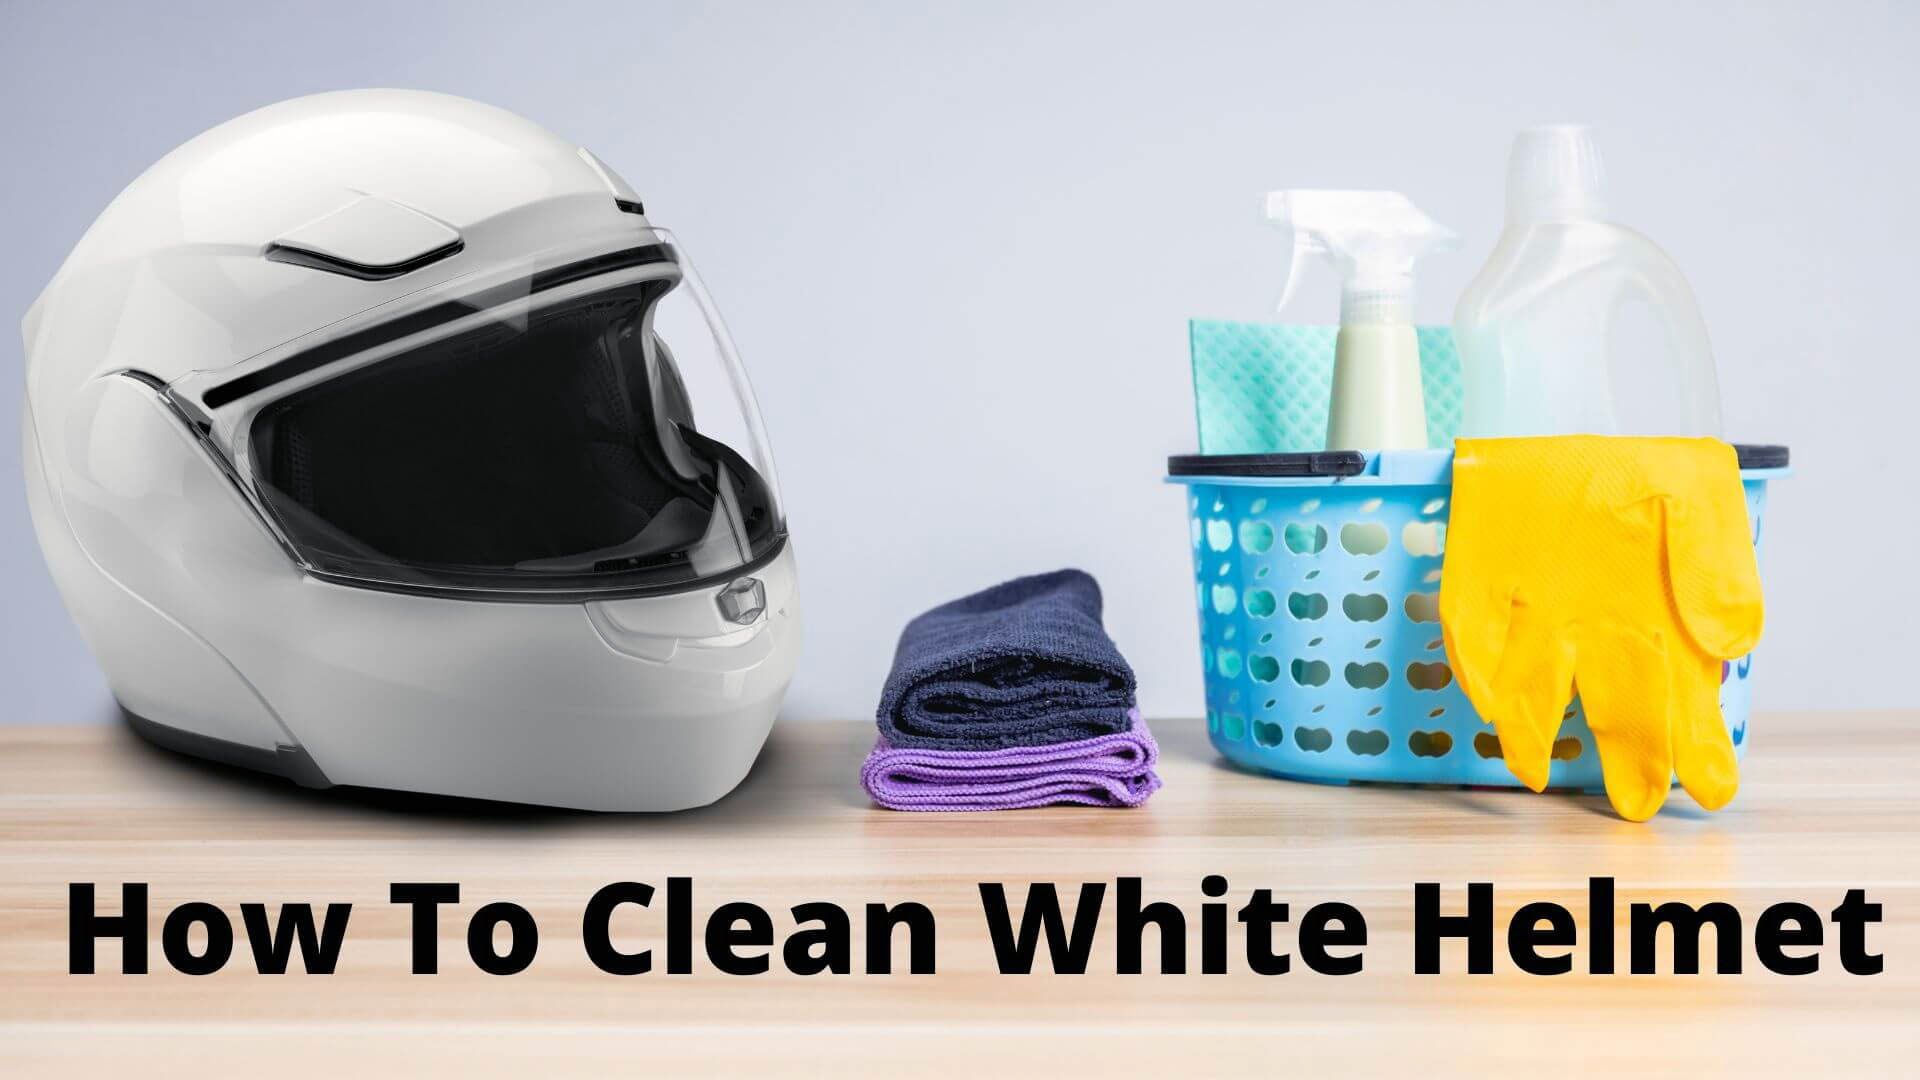 How To Clean White Helmet